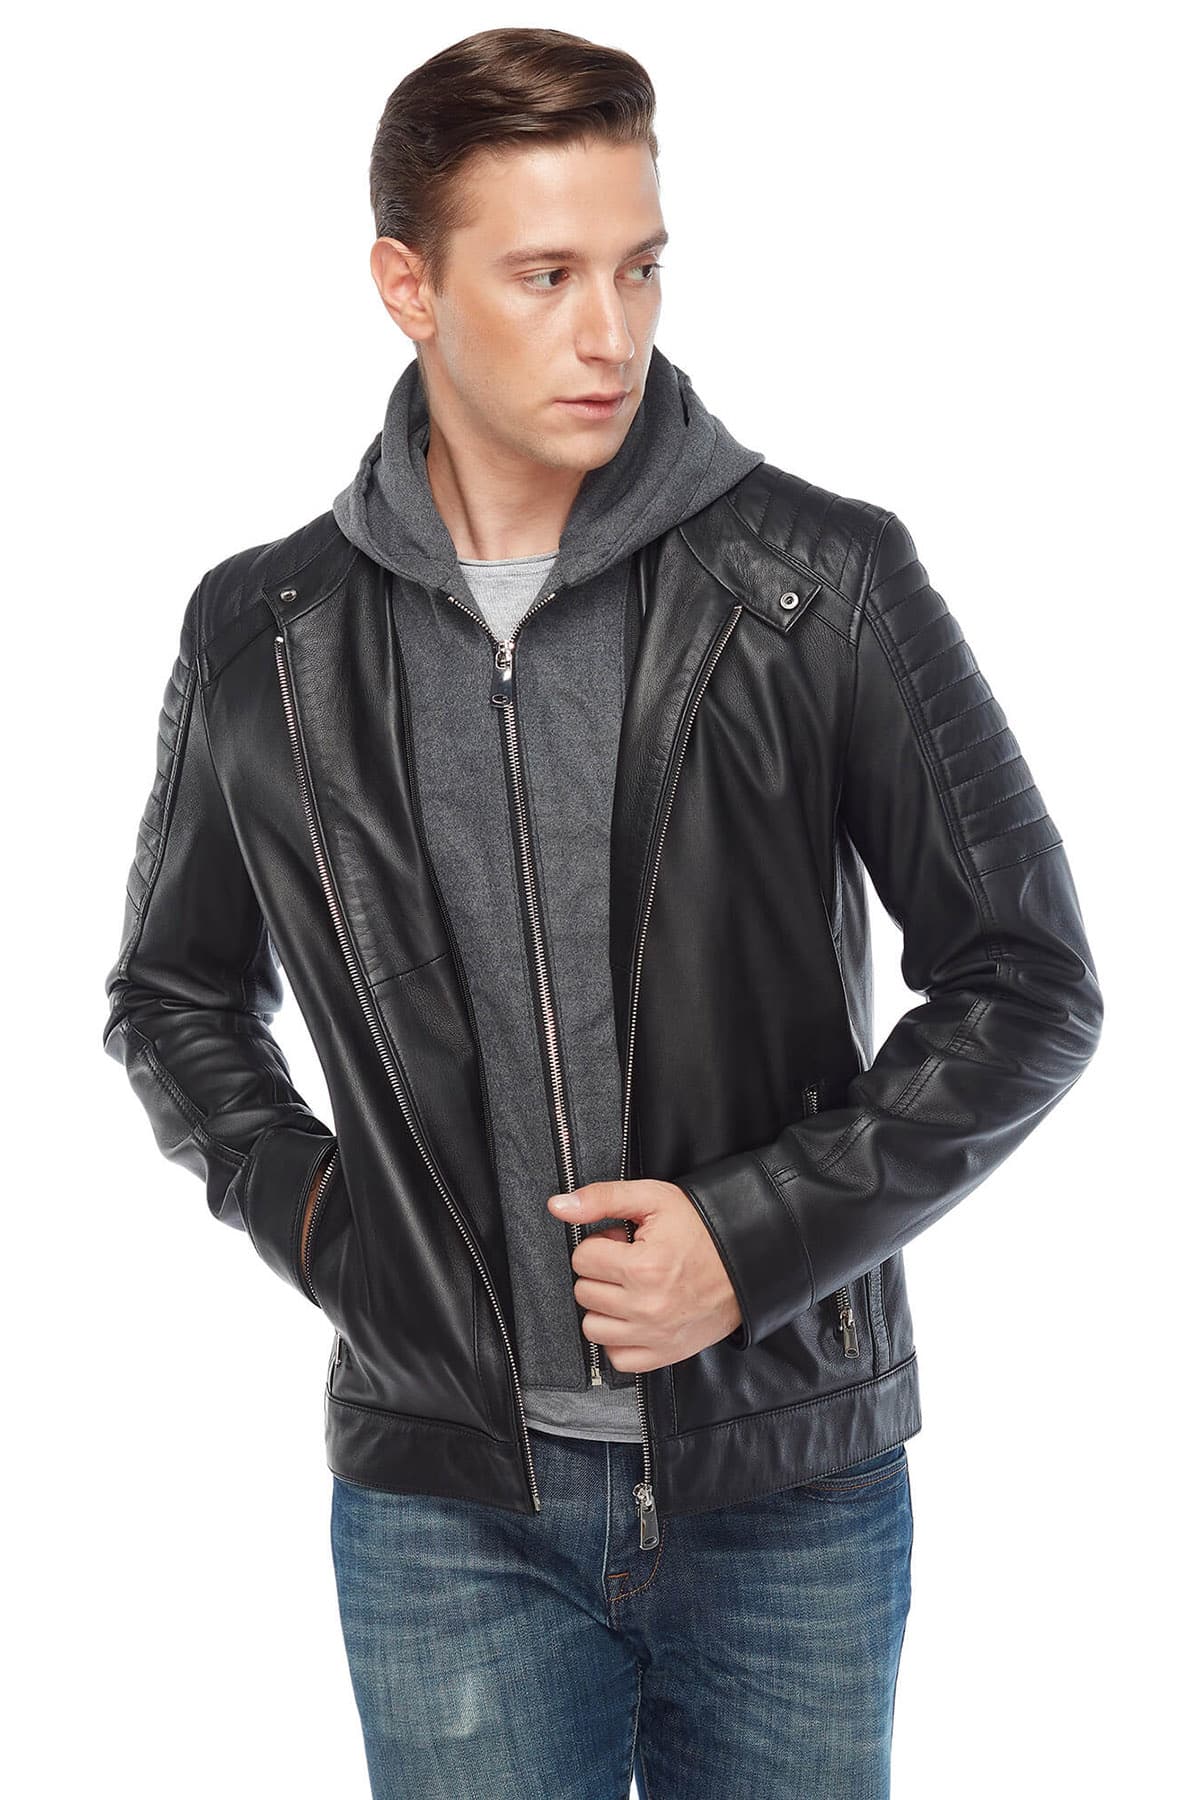 You've Searched for Black Hooded Men's Leather Jacket